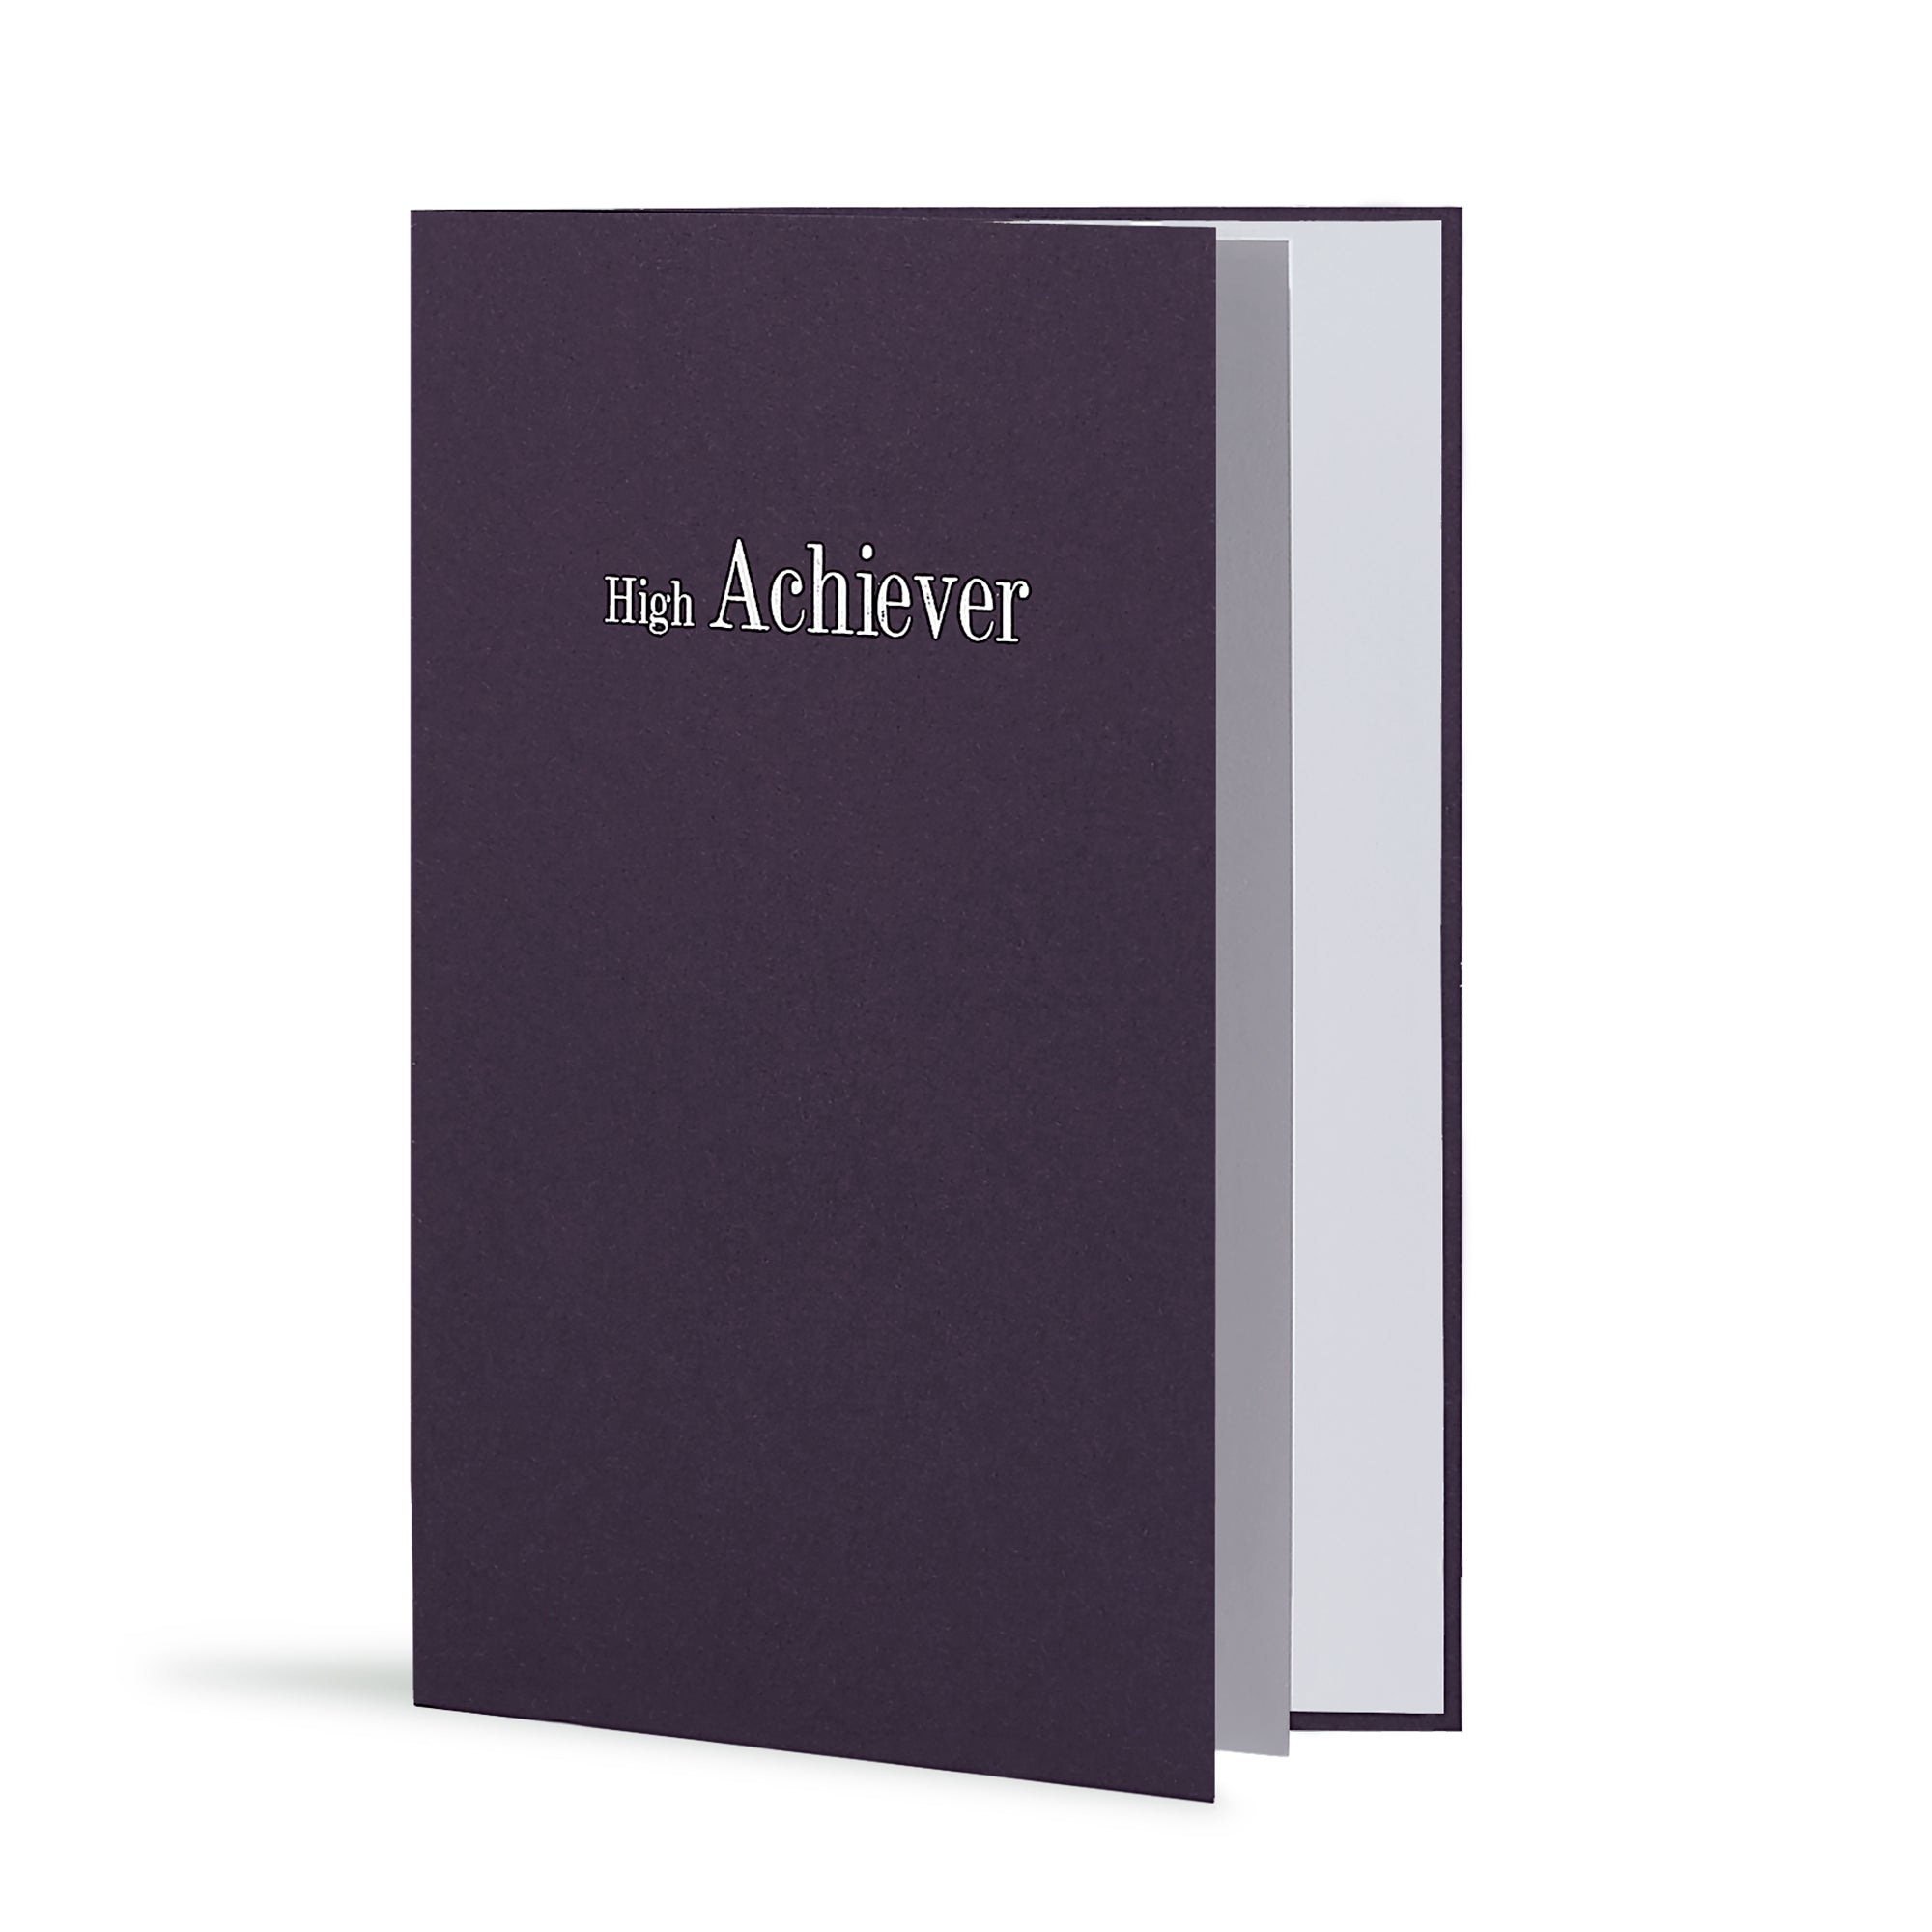 High Achiever Greeting Card in Deep Purple, Side